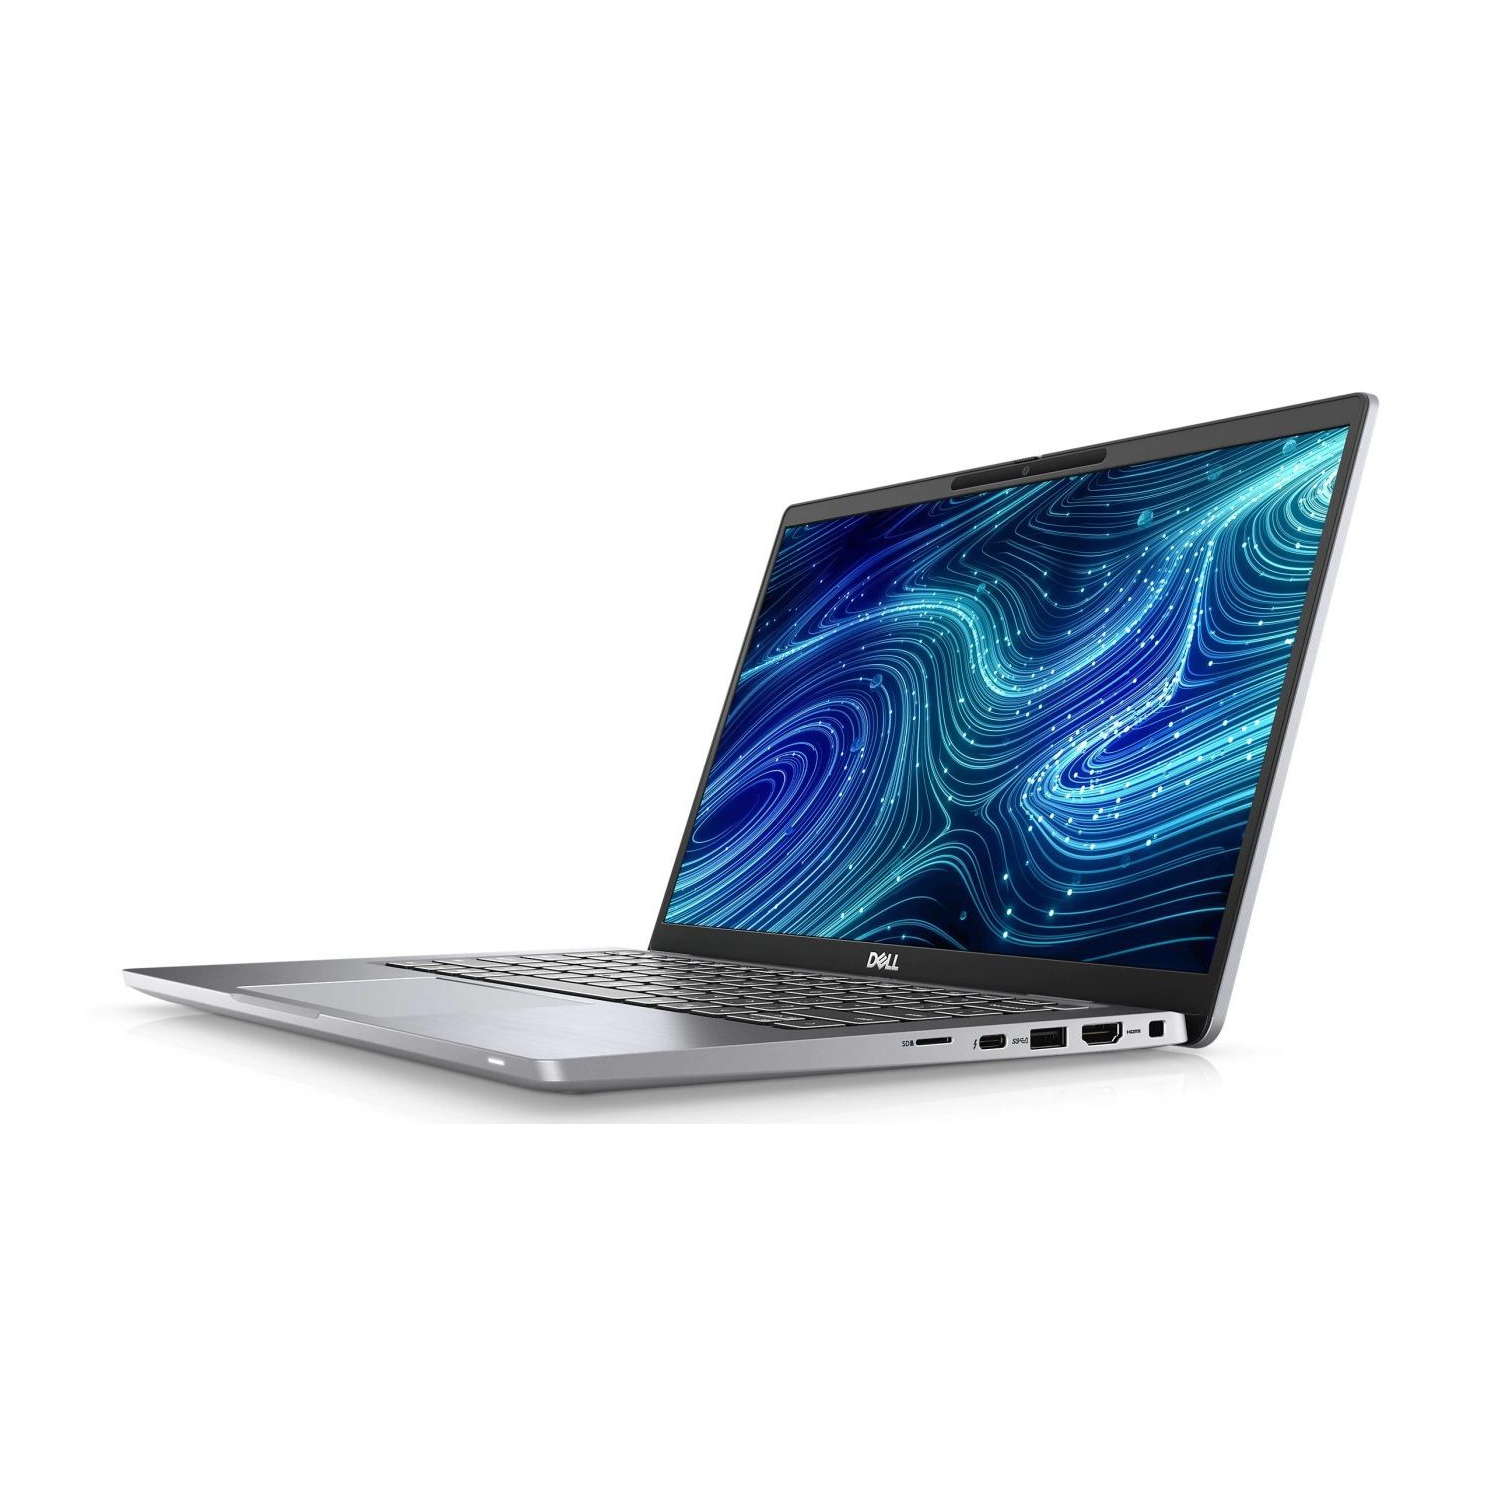 Refurbished (Excellent) - Dell Latitude 7000 7420 Laptop (2021) | 14" 4K | Core i7 - 256GB SSD - 16GB RAM | 4 Cores @ 4.7 GHz - 11th Gen CPU Certified Refurbished